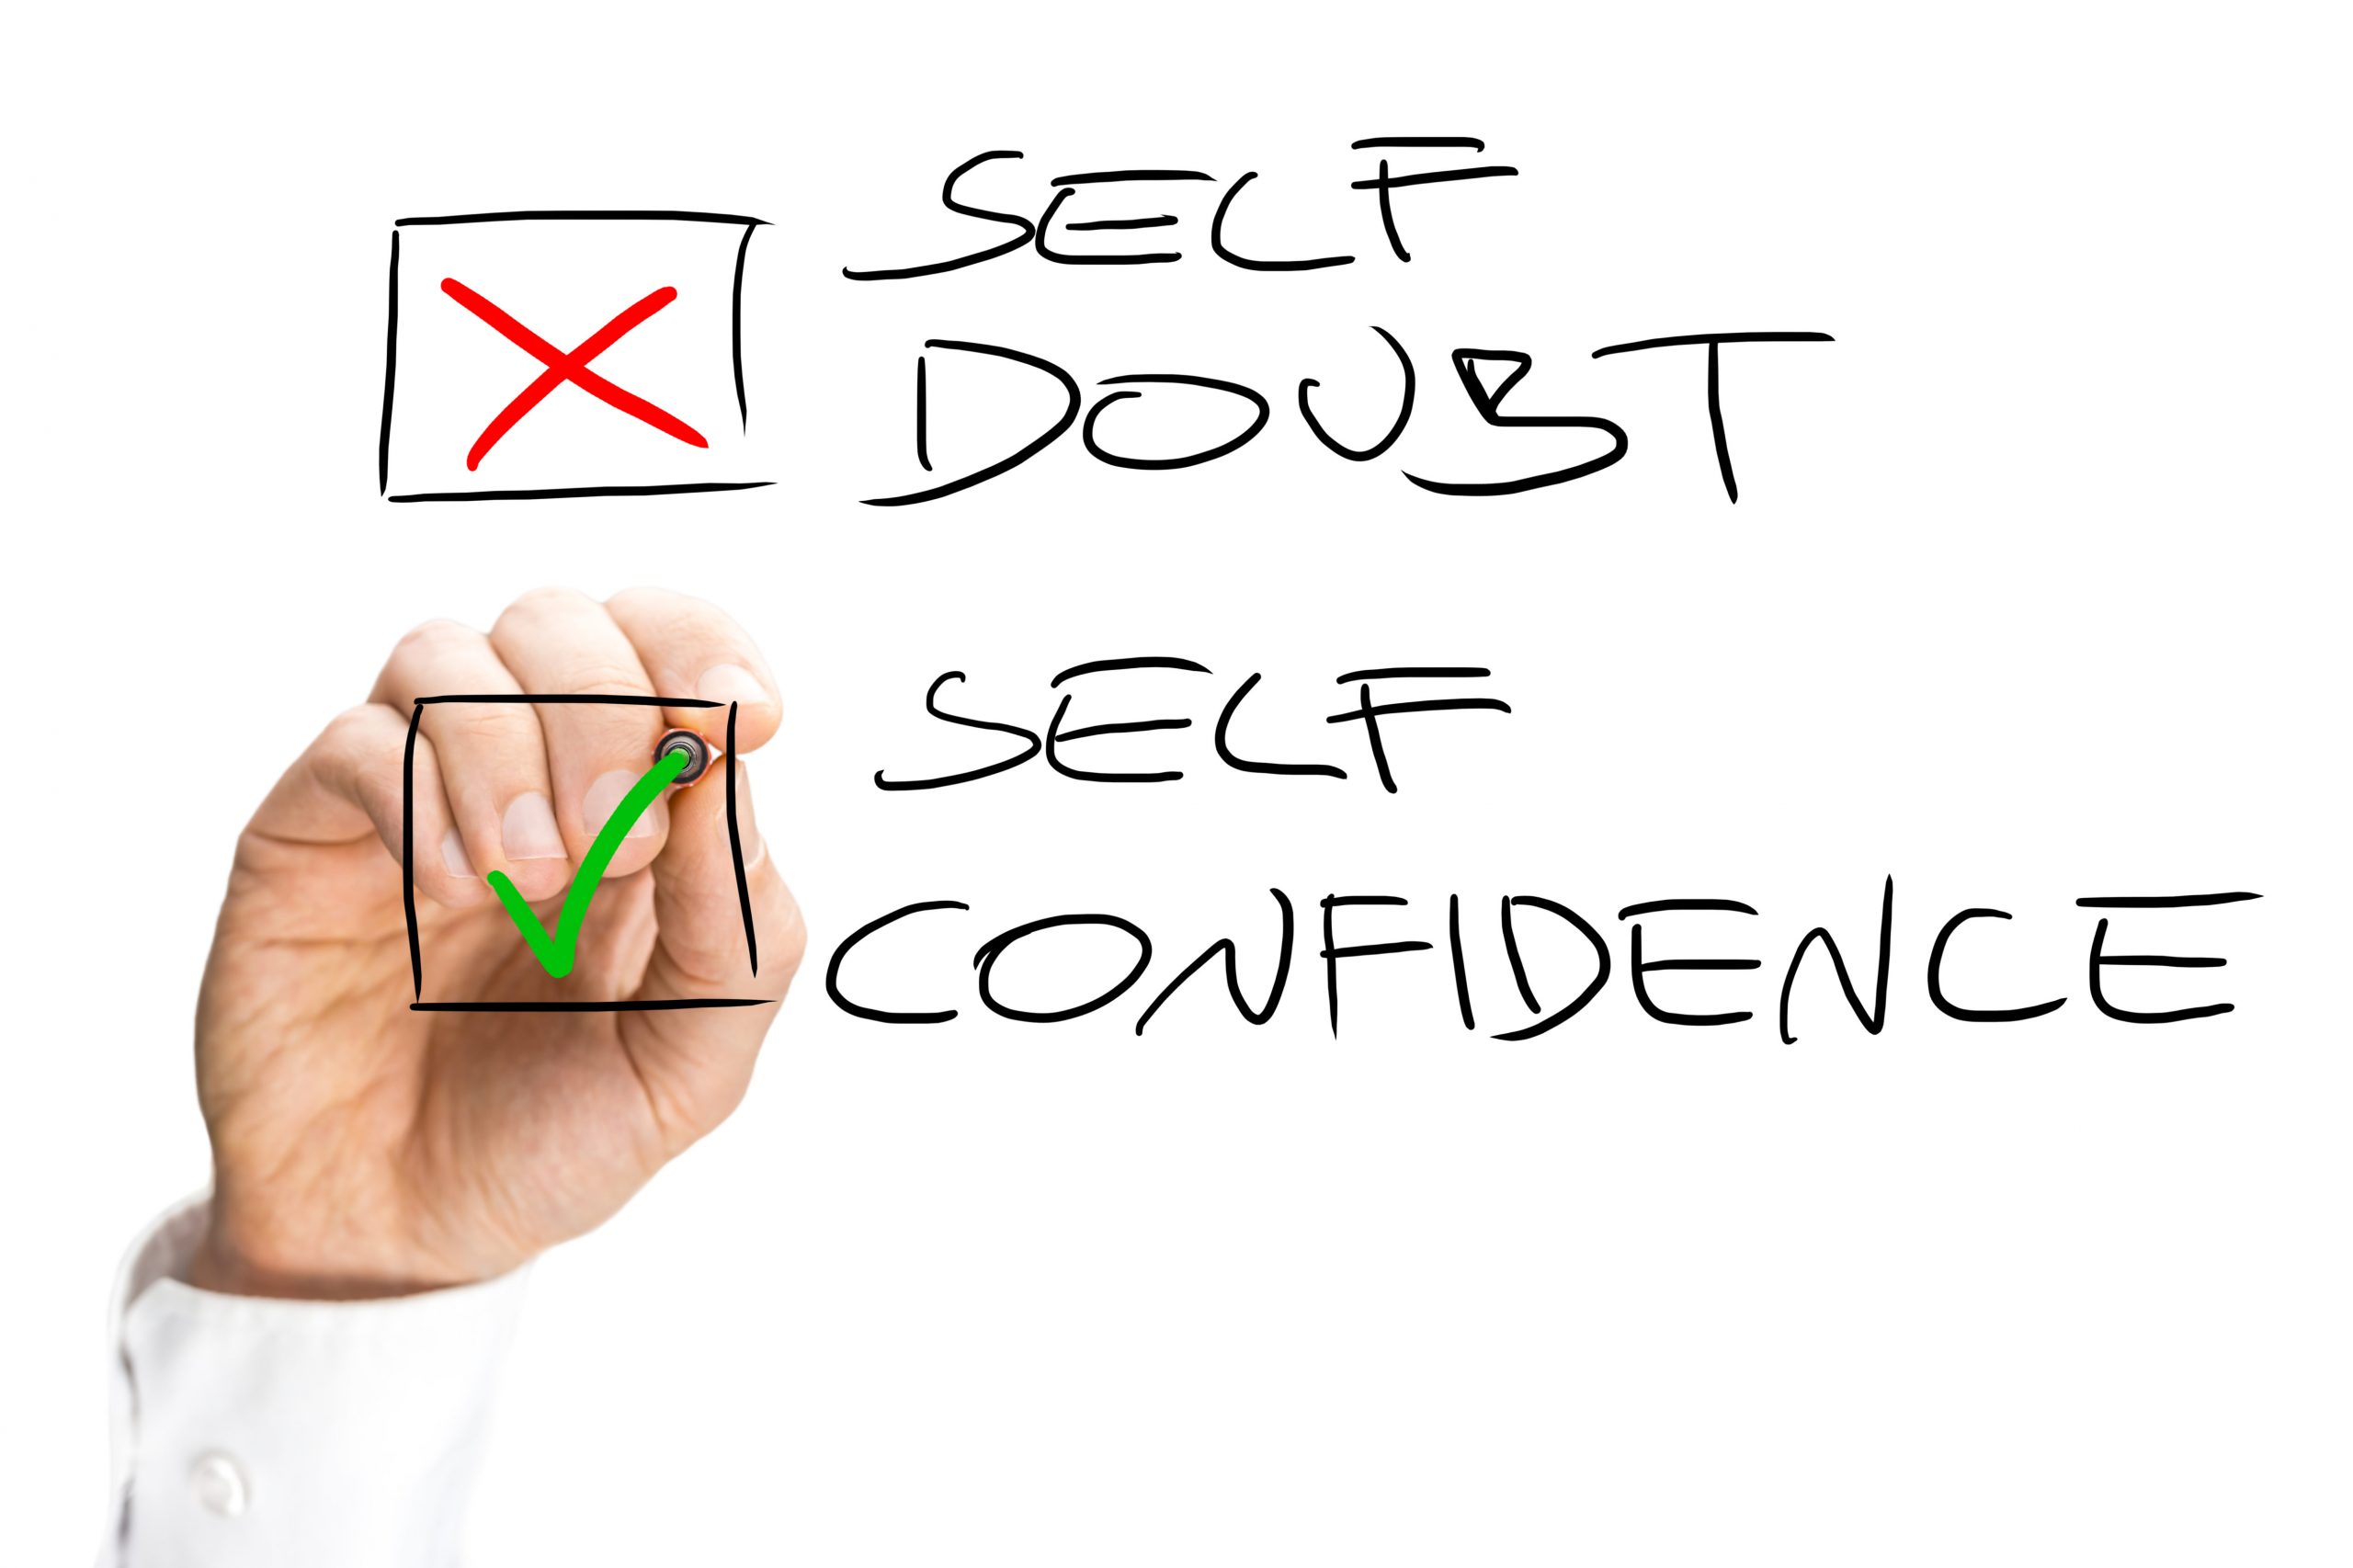 Self confidence is needed to be in control of life events